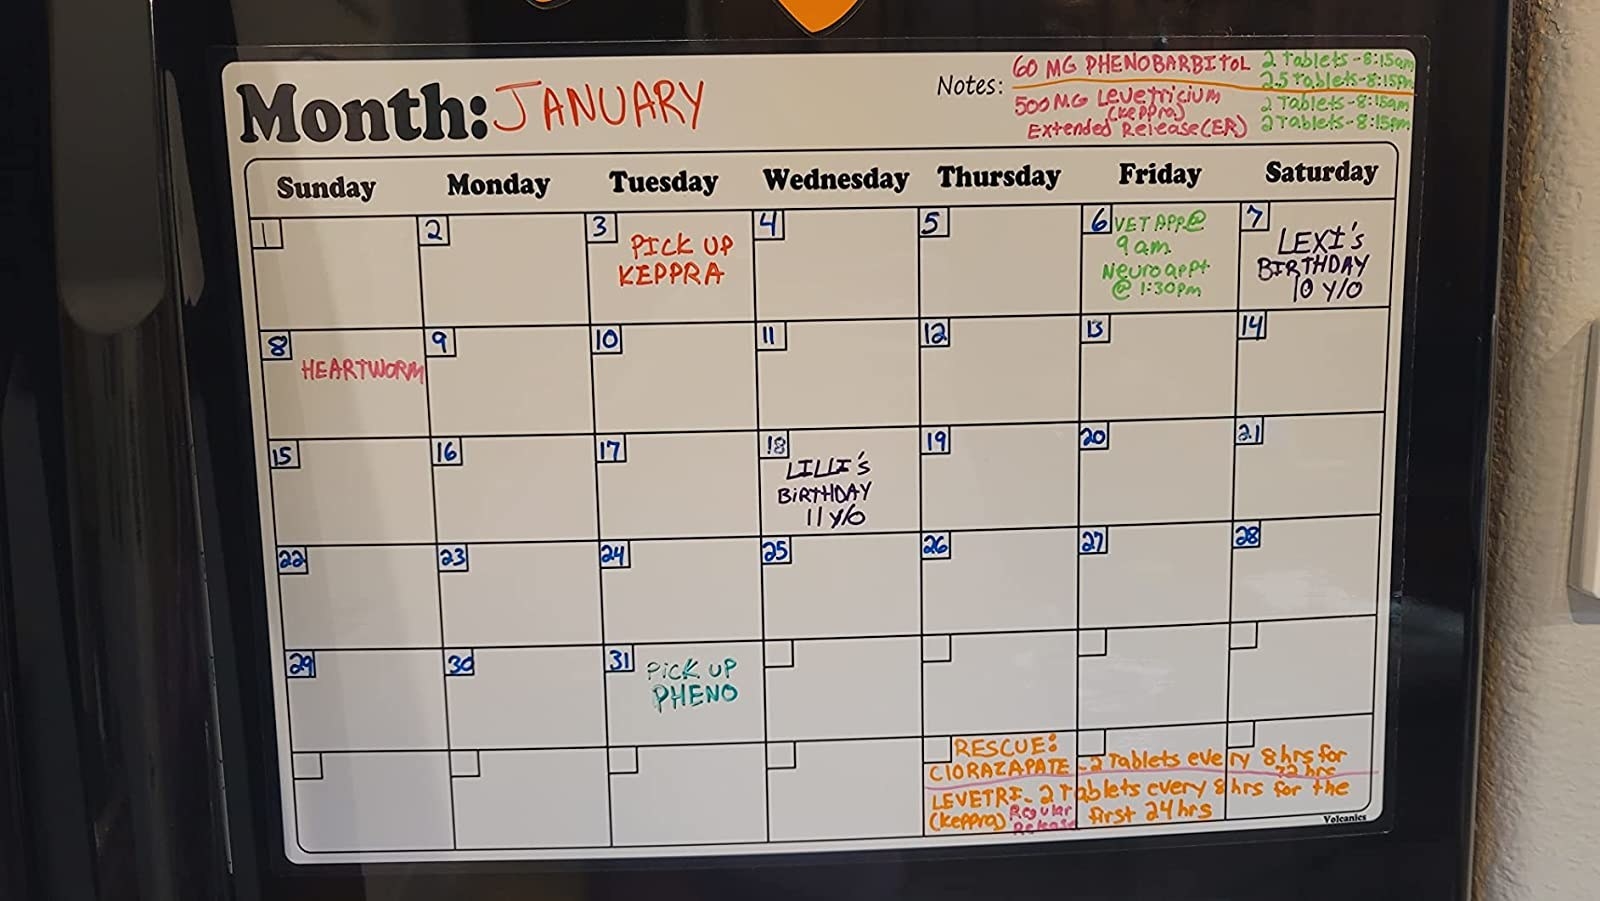 Reviewer image of the calendar on their fridge